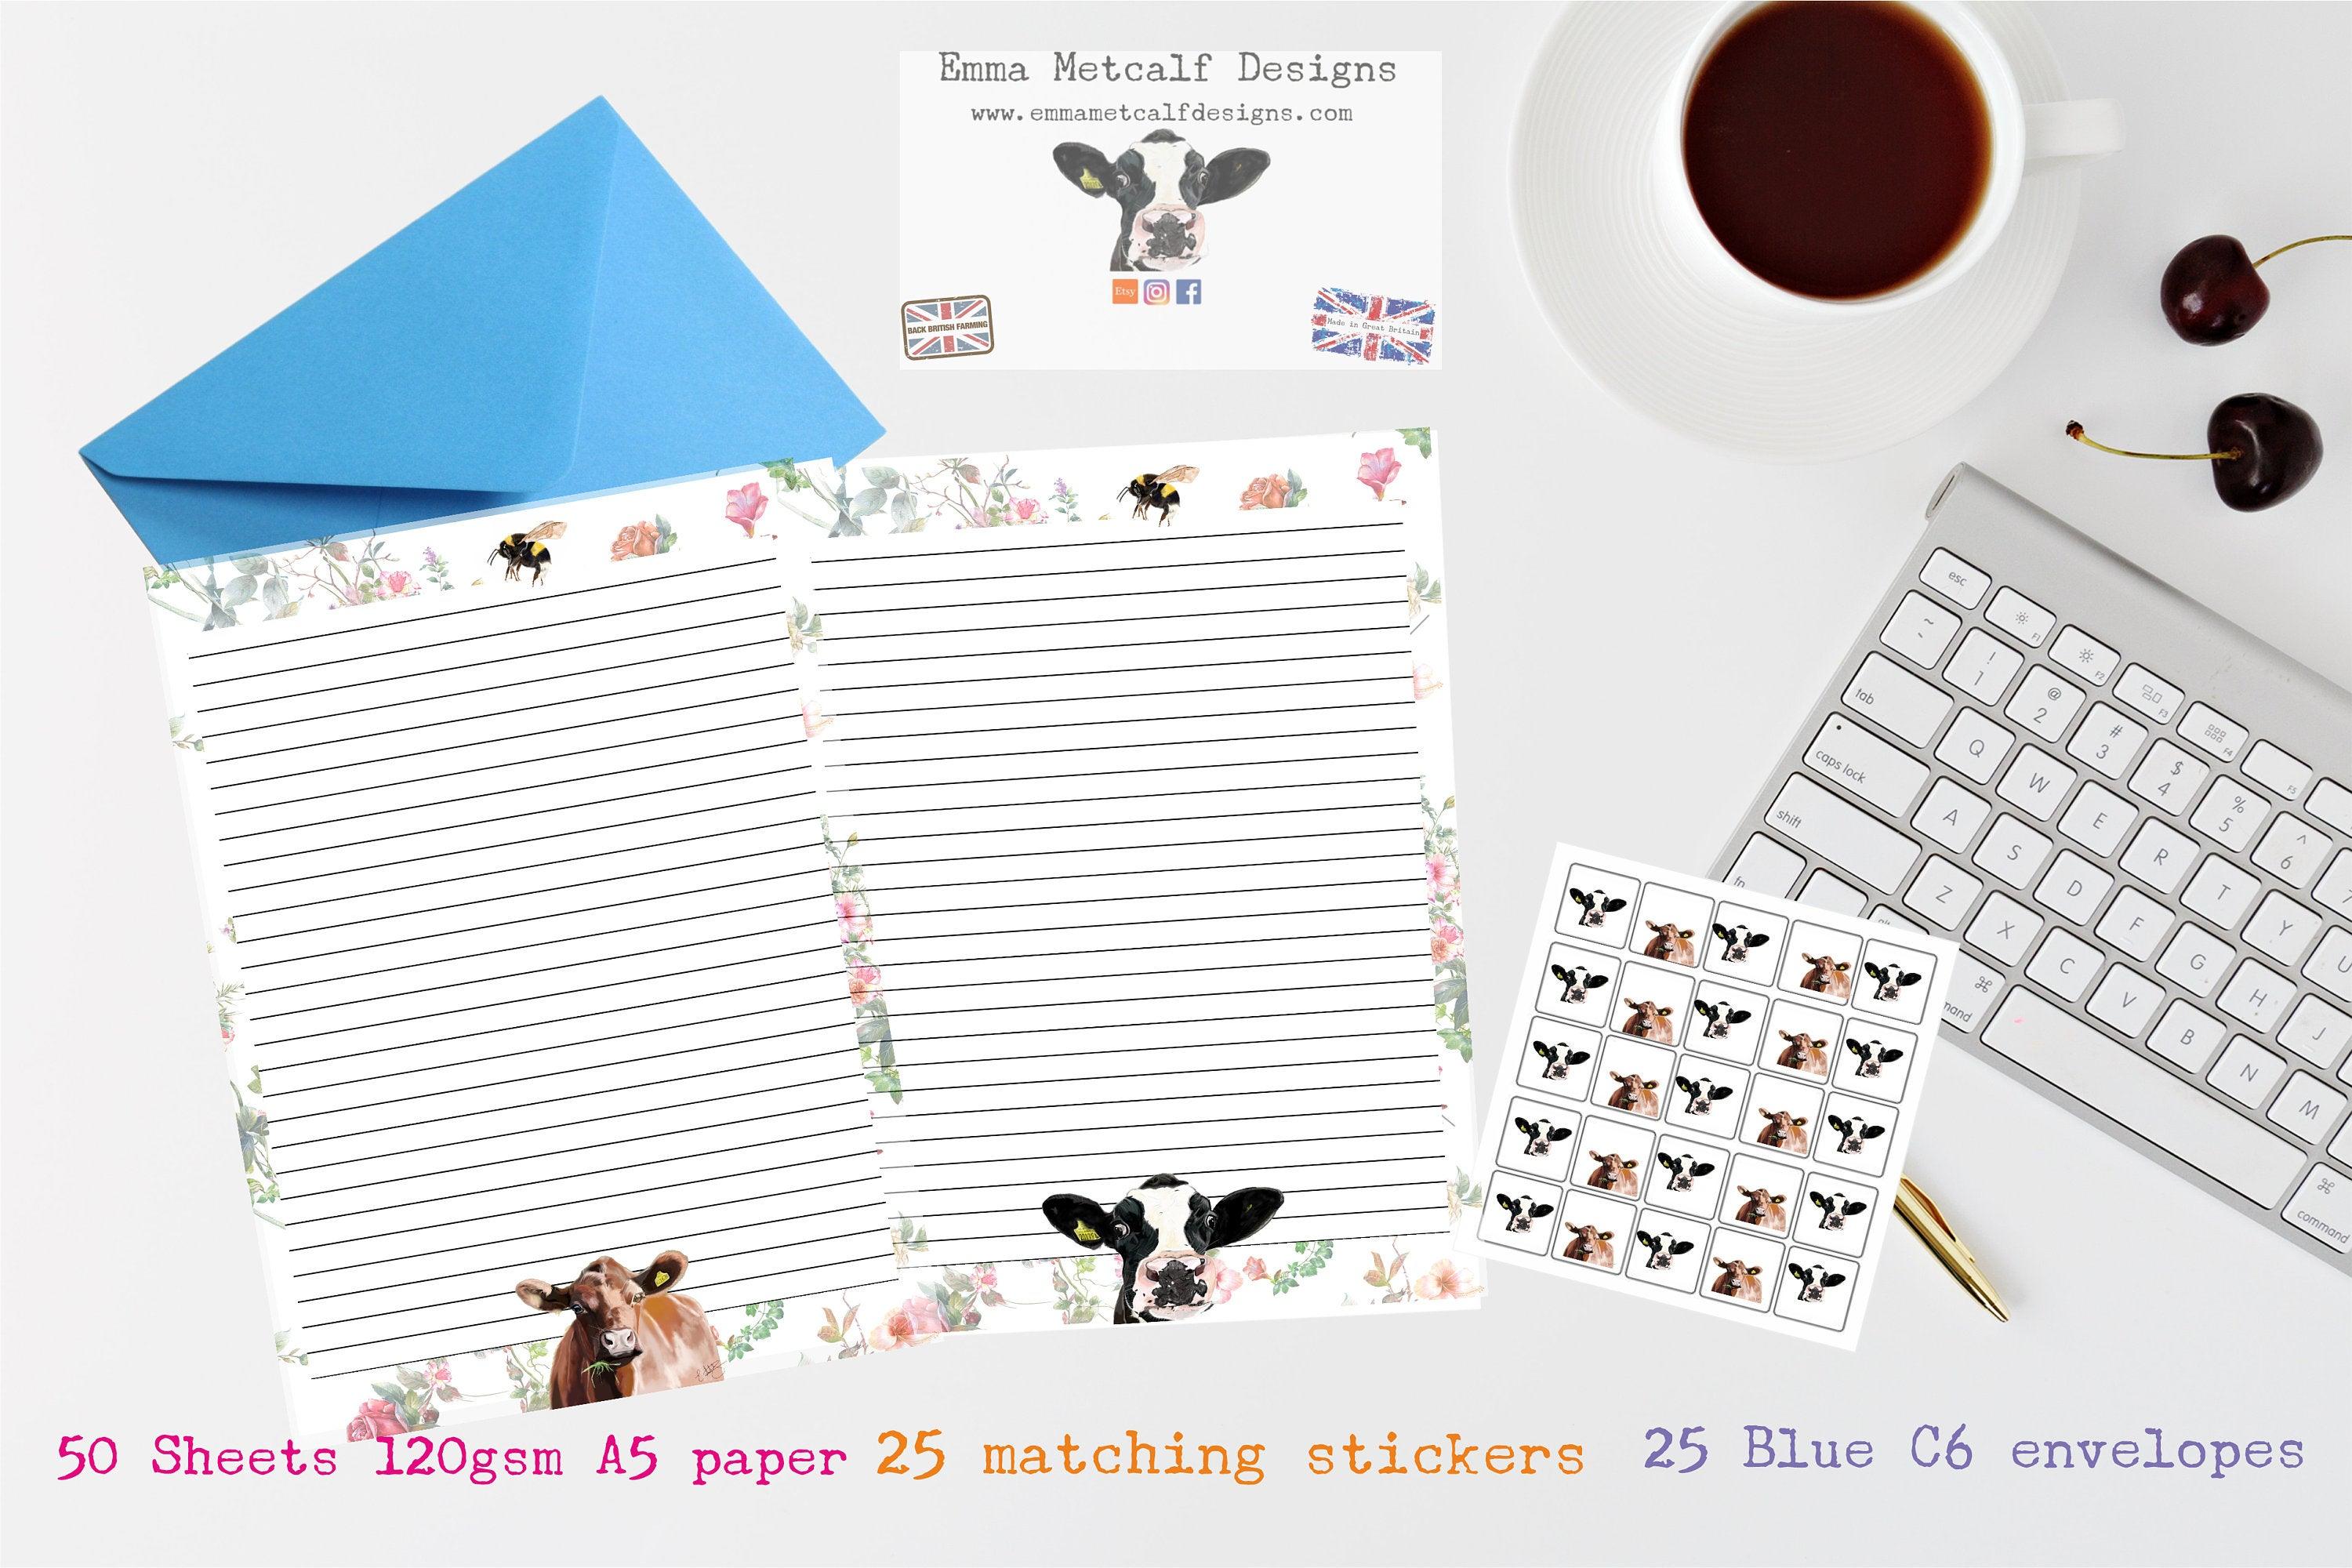 Beautiful hand designed letter writing set - Writing paper-Dairy cows  - Envelopes- Stickers- Letter writing- Traditional writing set